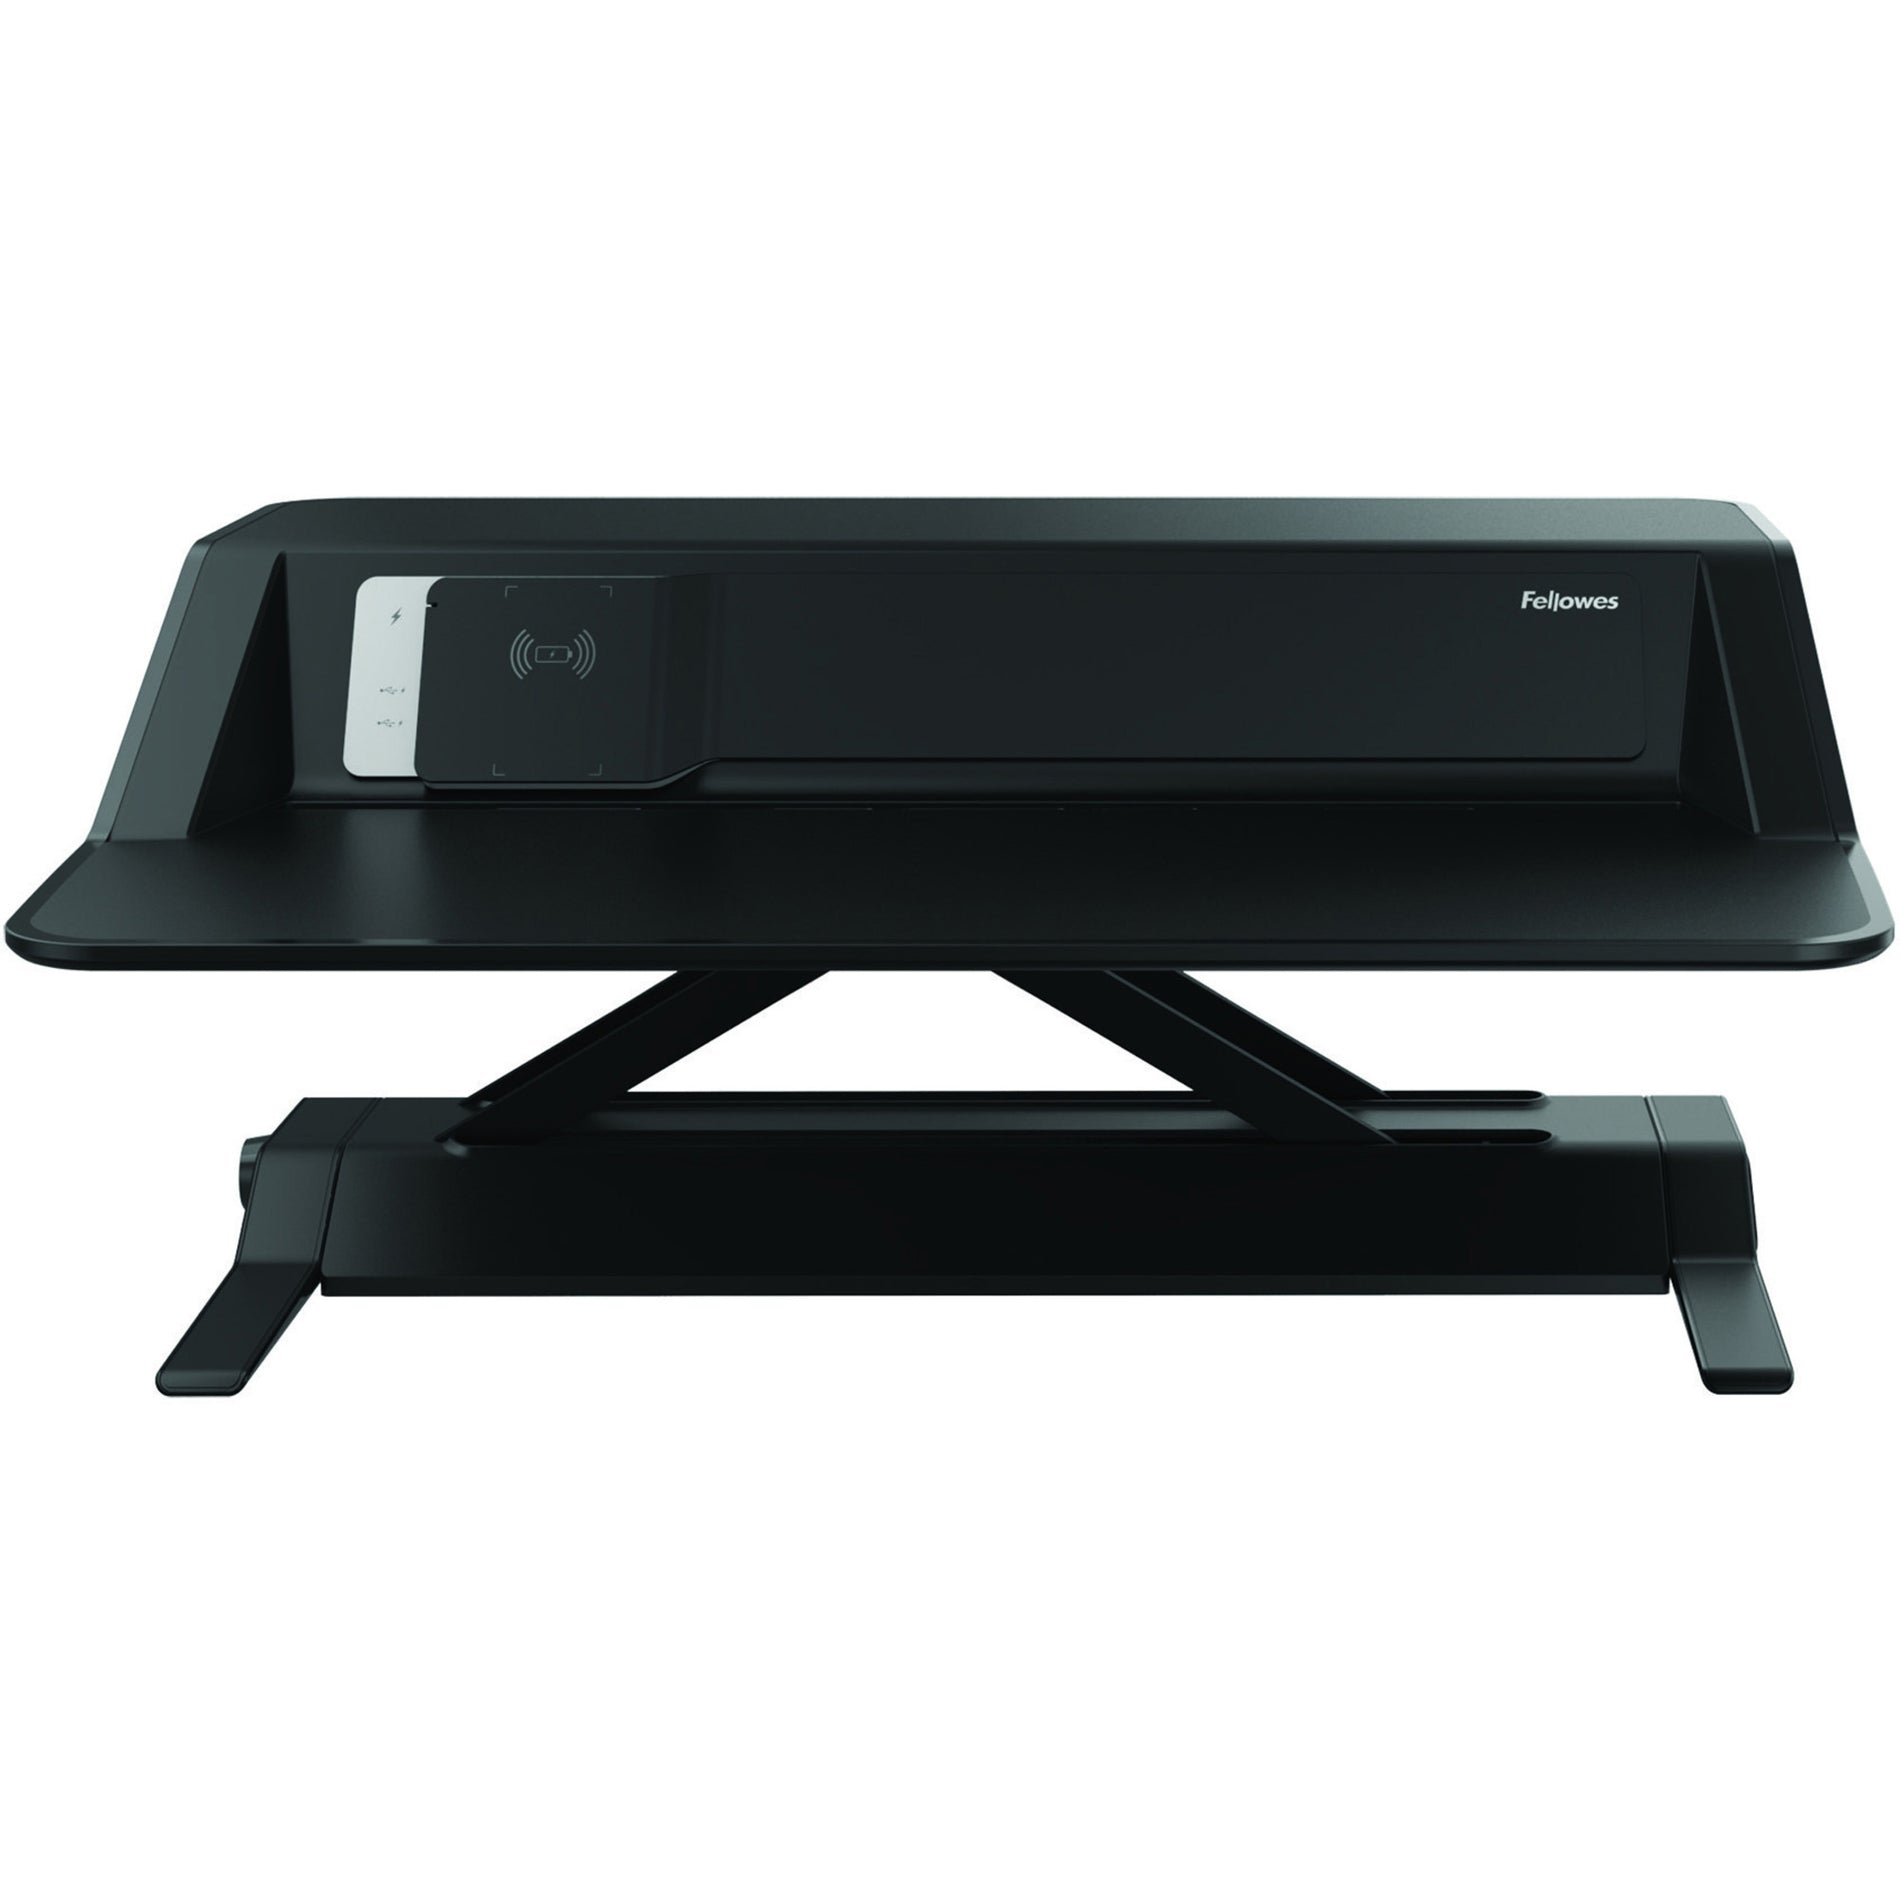 Fellowes 8080301 Lotus DX Sit-Stand Workstation, Black - Antimicrobial, Charge Function, Built-in USB Port